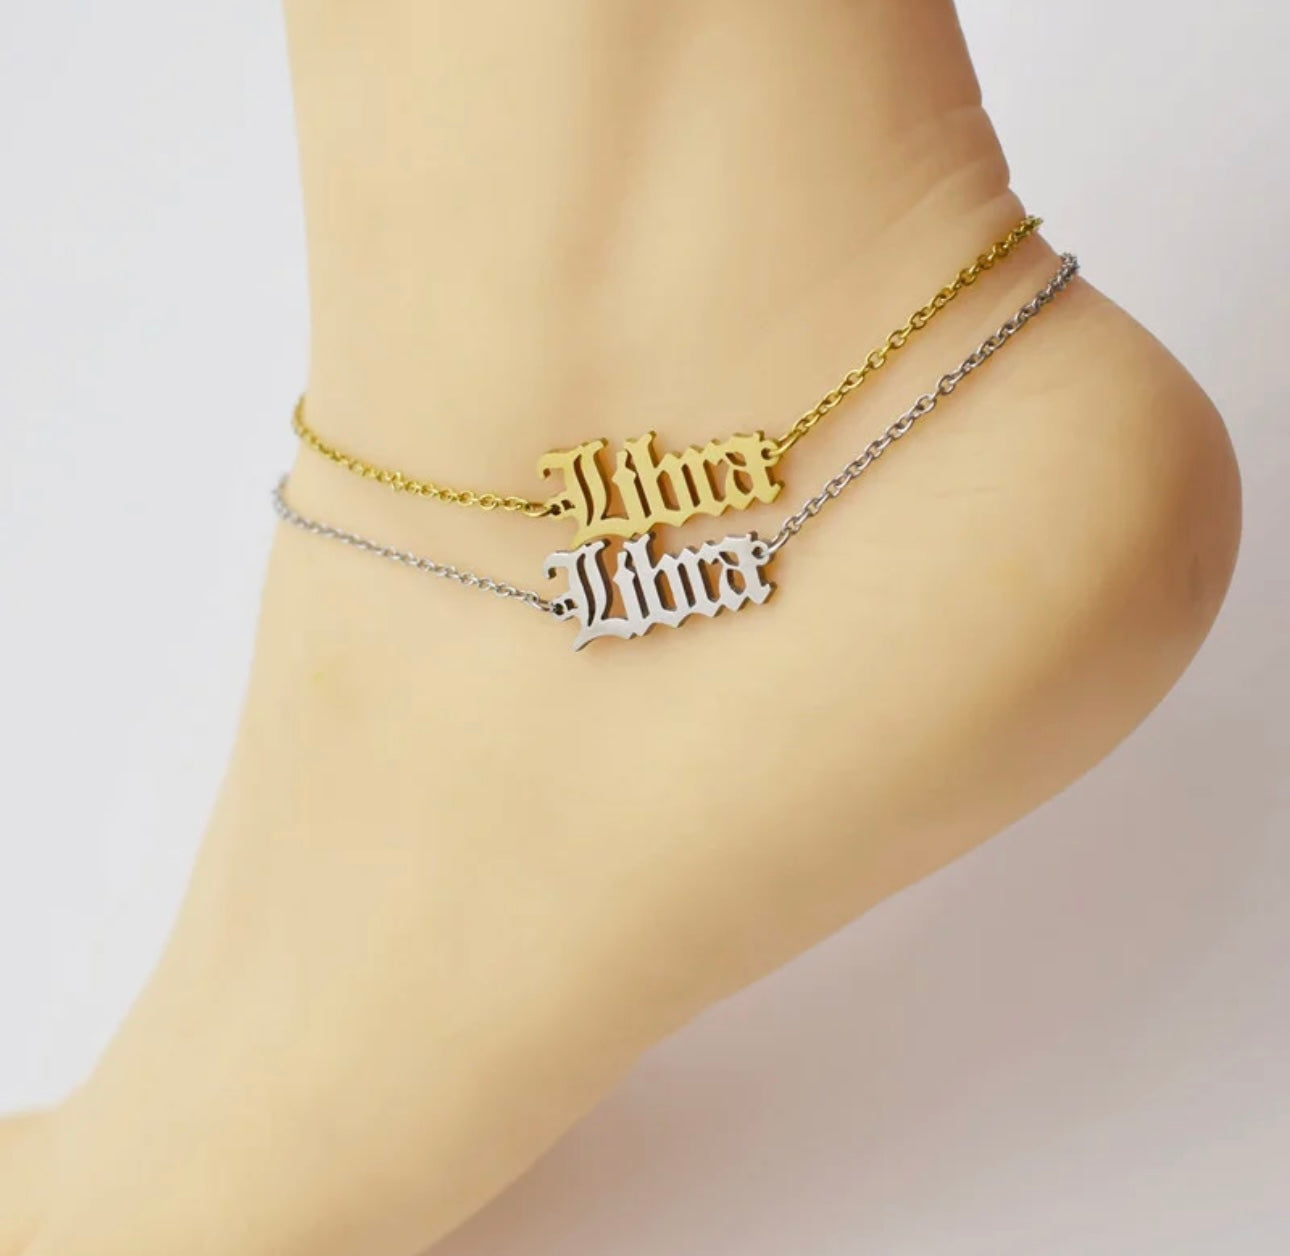 HOROSCOPE ANKLET SILVER PLATED